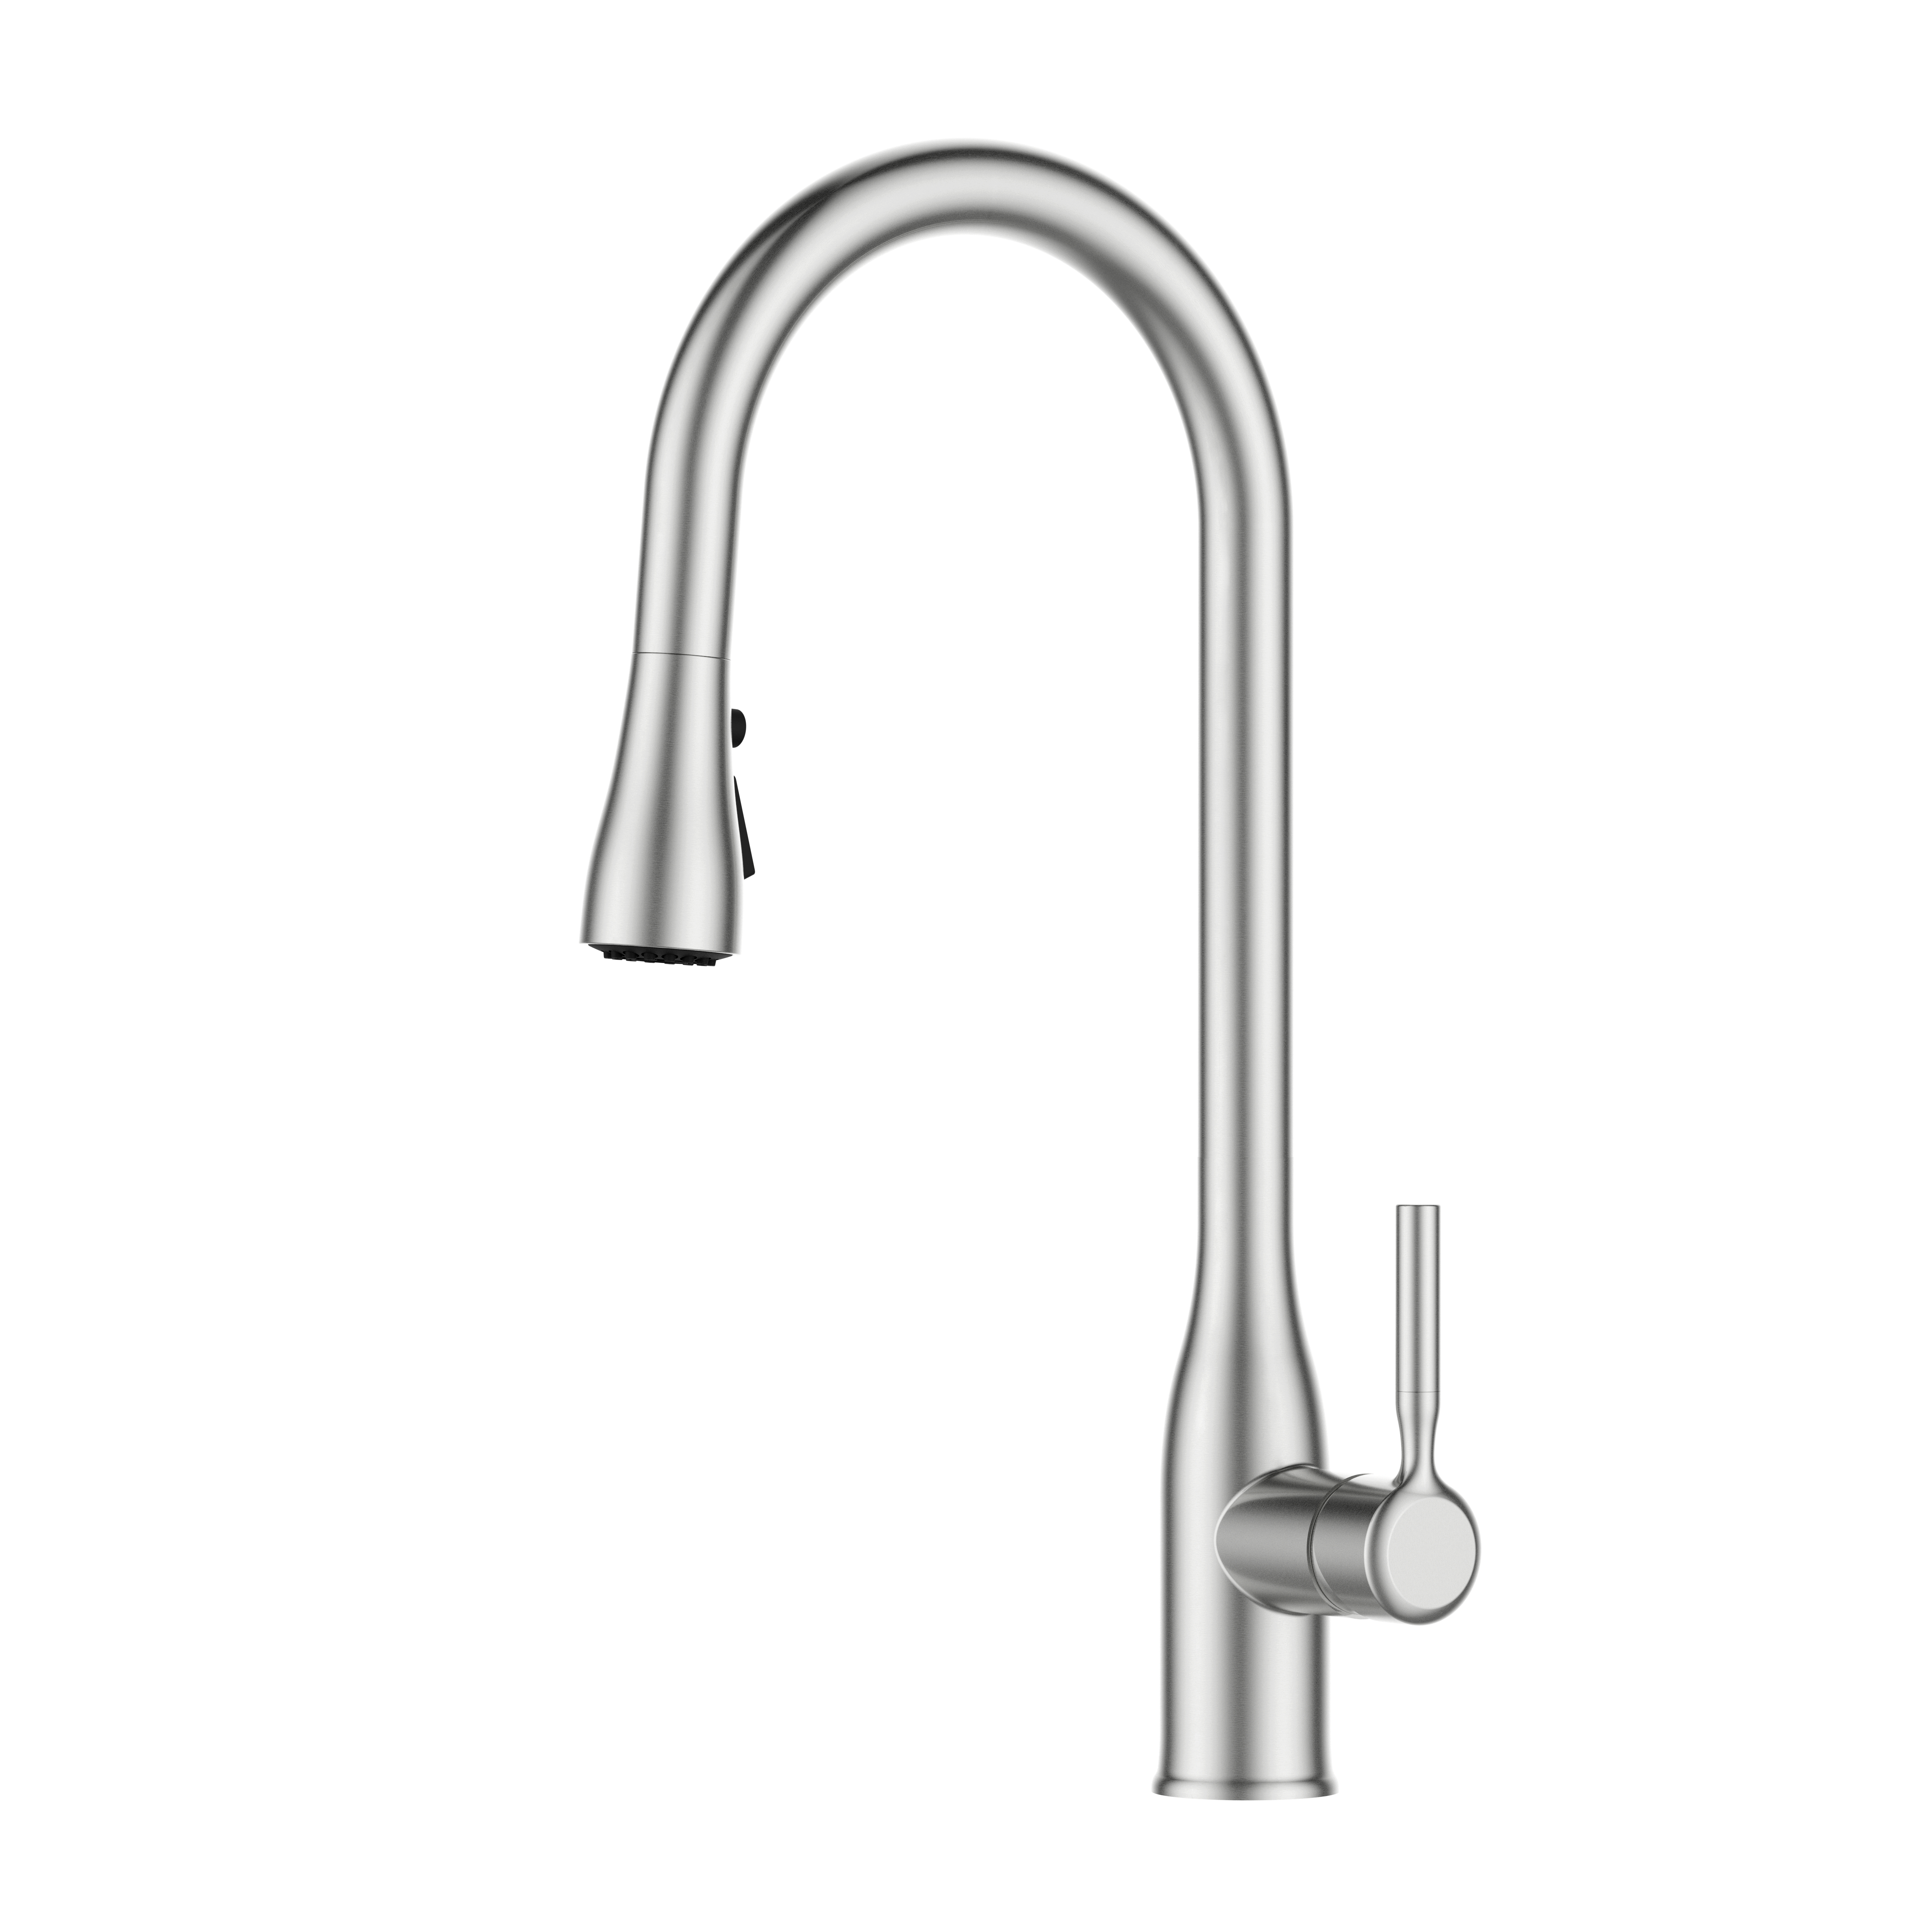 Hot Selling Kitchen Faucet Material Brushed Nickel